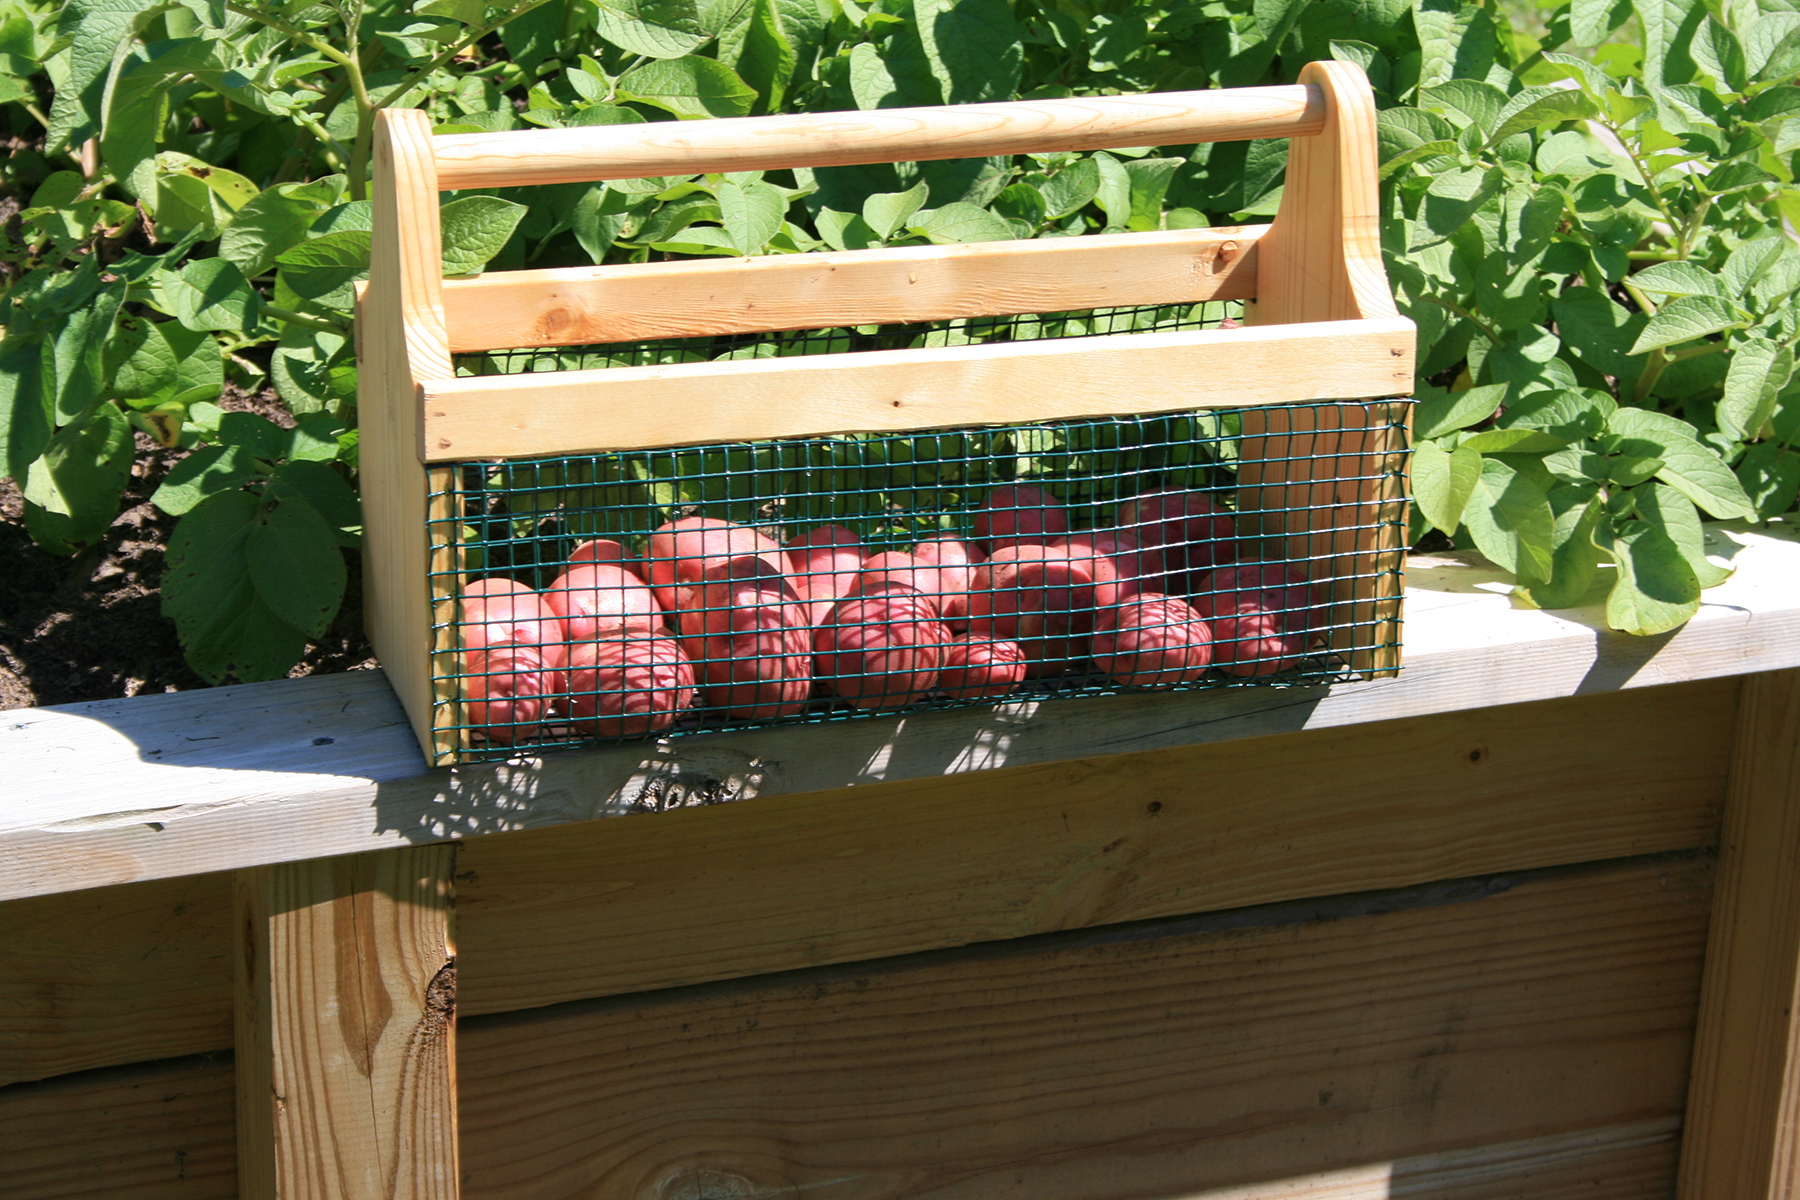 Raised beds can allow the home gardener to grow root crops, like these red potatoes, that would be difficult in bad native soil.